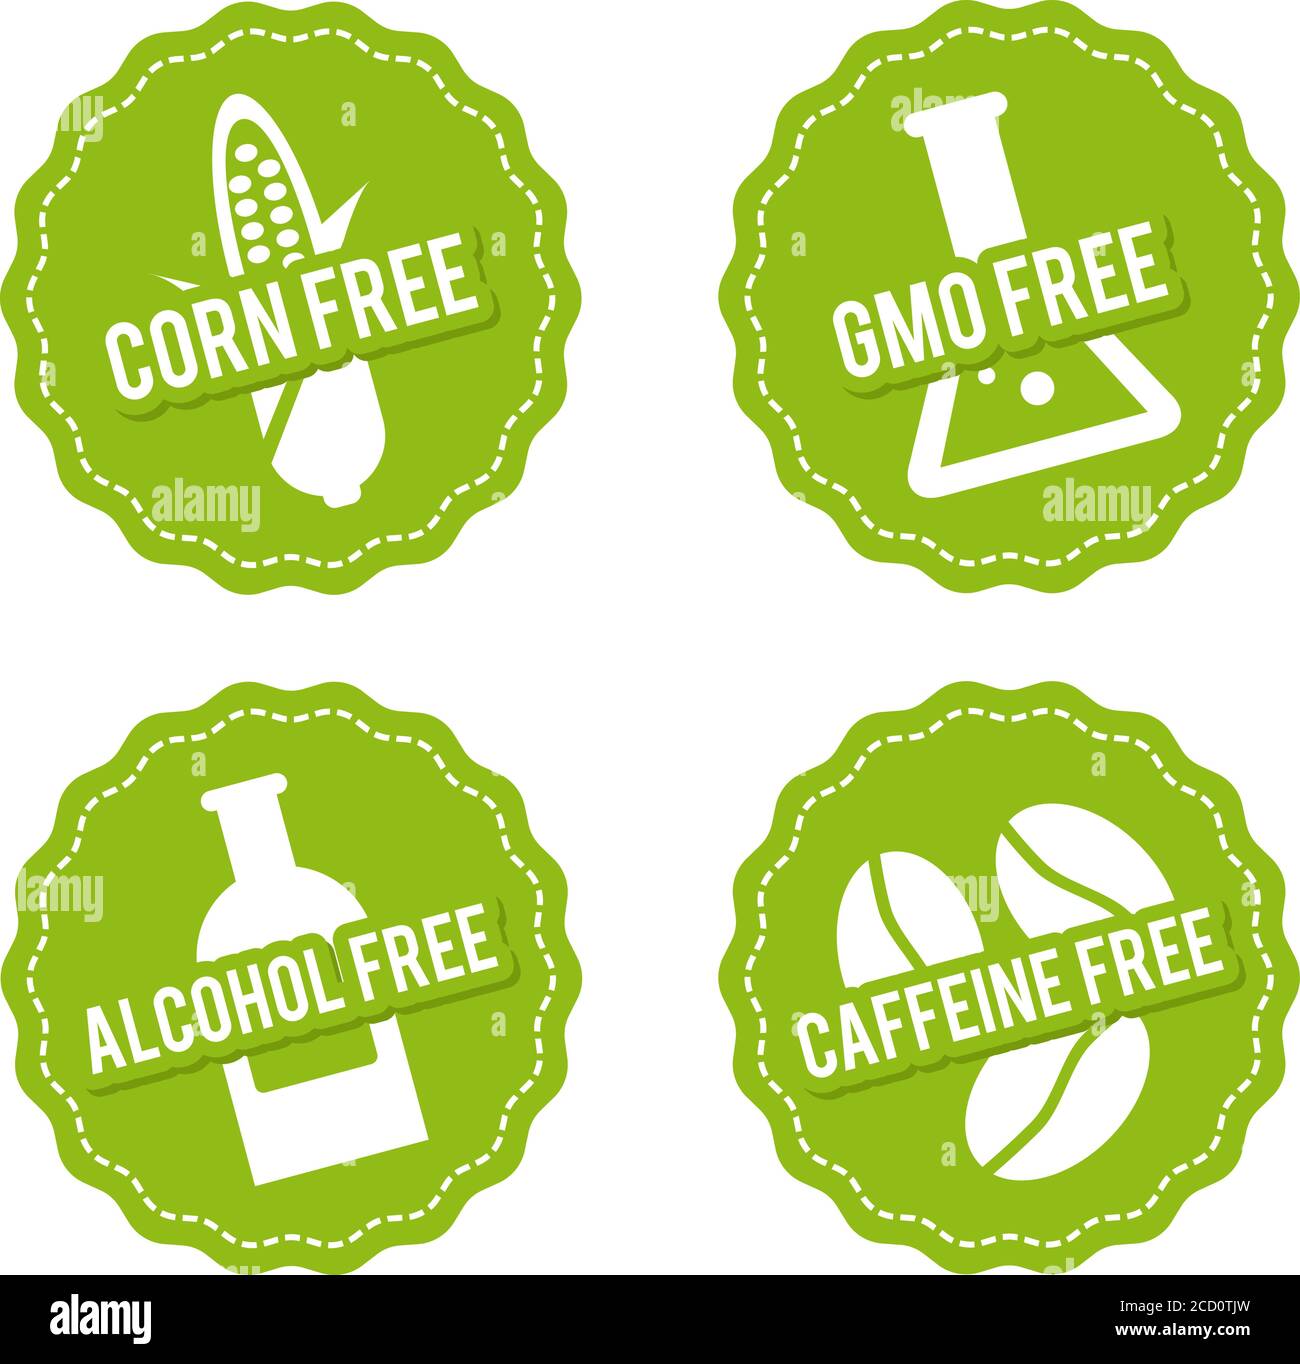 Set of Allergen free Badges. Corn free, GMO free, Alcohol free, Caffeine free. Vector hand drawn Signs. Can be used for packaging Design. Stock Vector